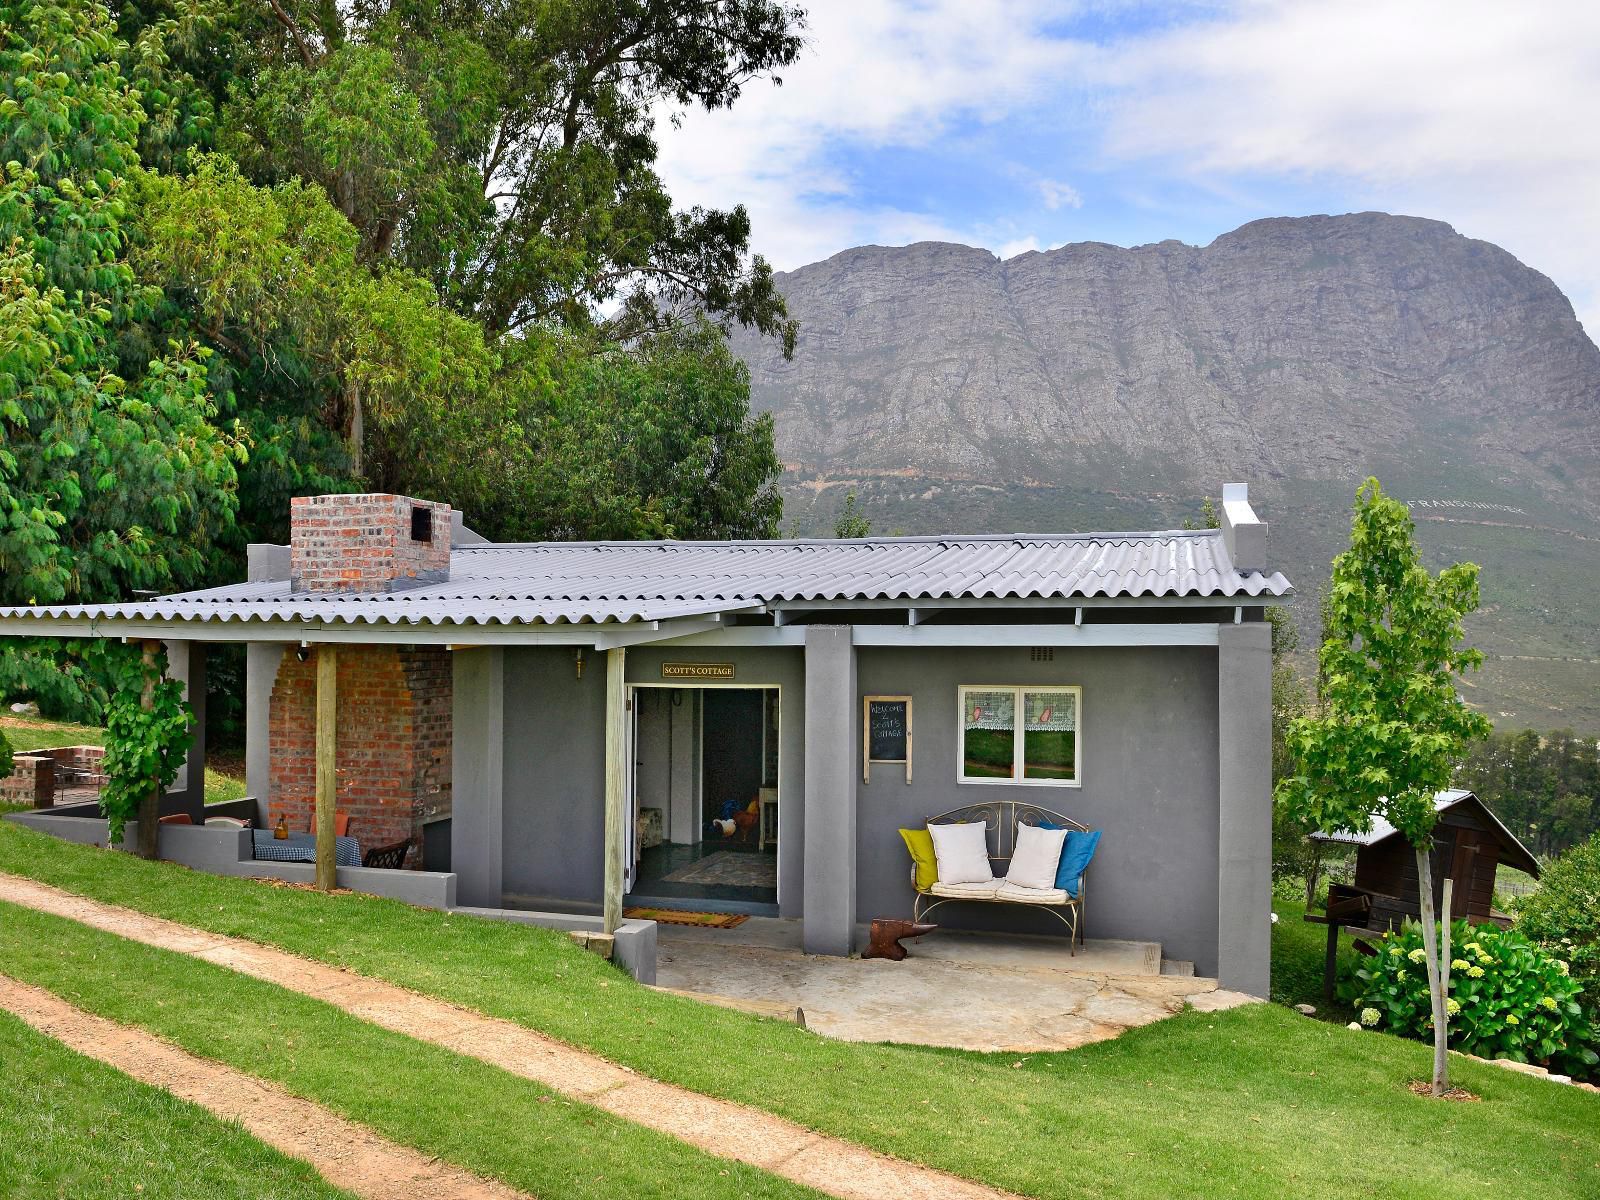 Courchevel Cottages Franschhoek Western Cape South Africa House, Building, Architecture